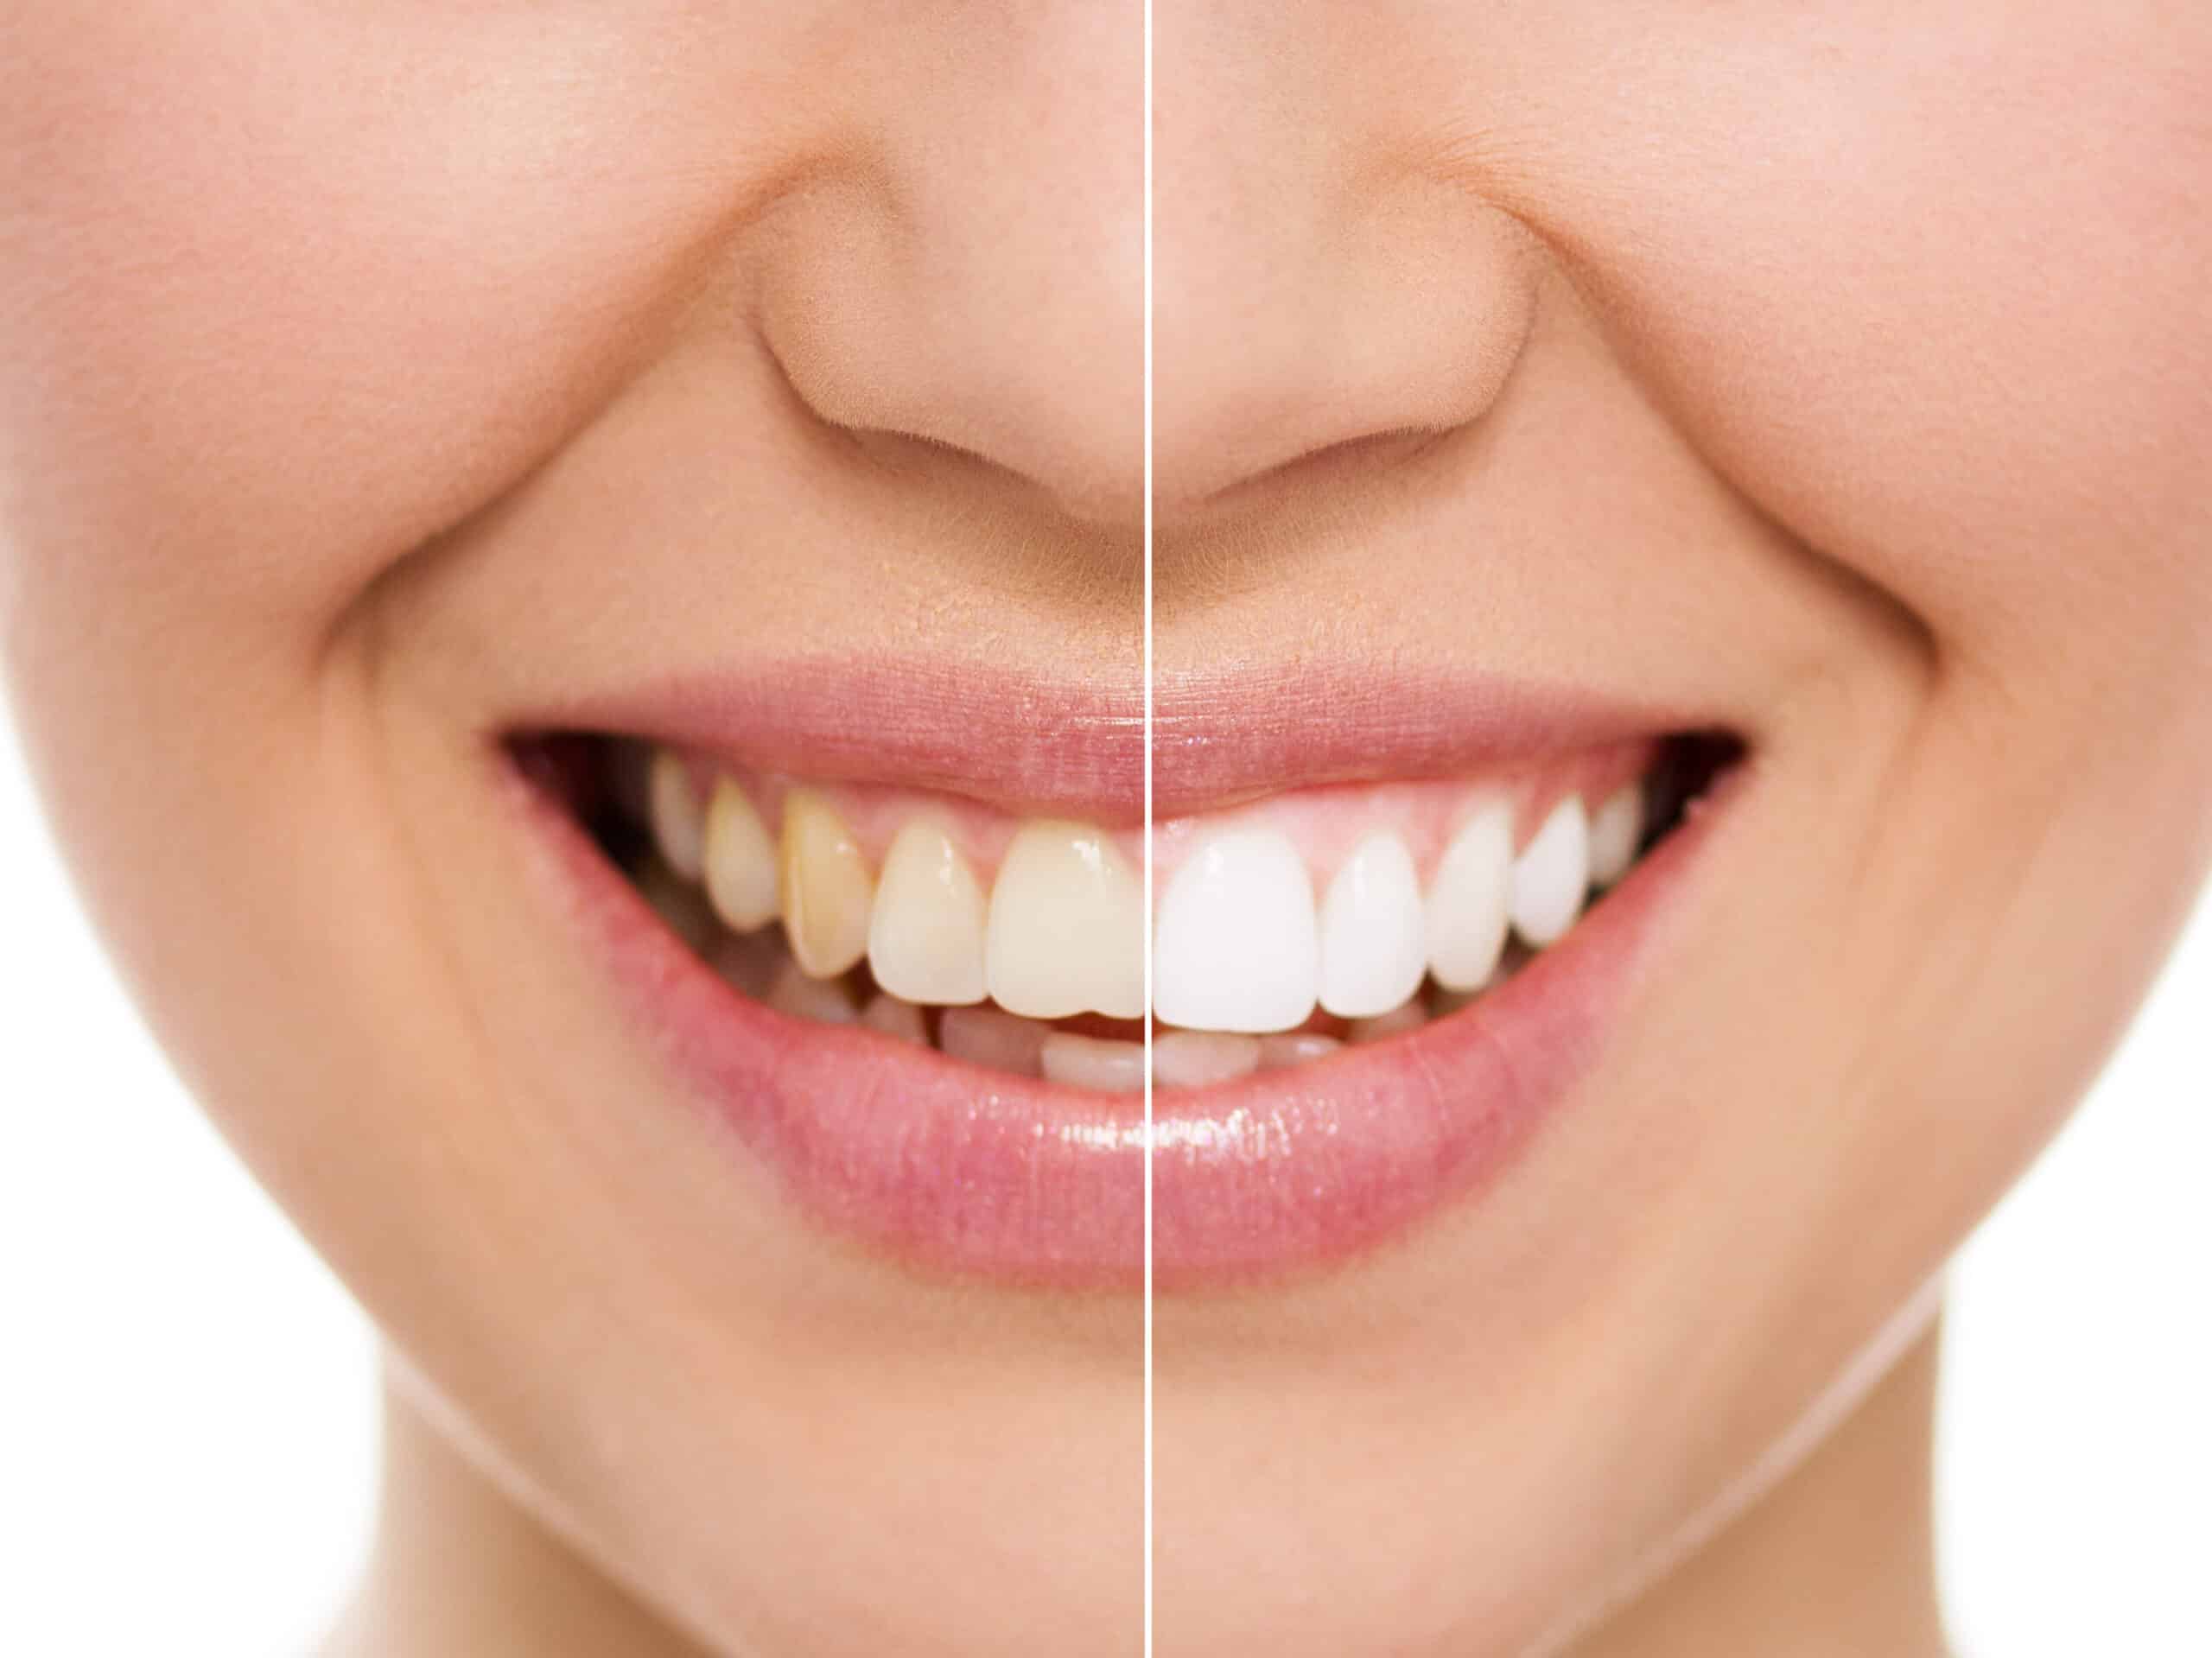 Tooth Discoloration: Causes, Treatment, and Prevention